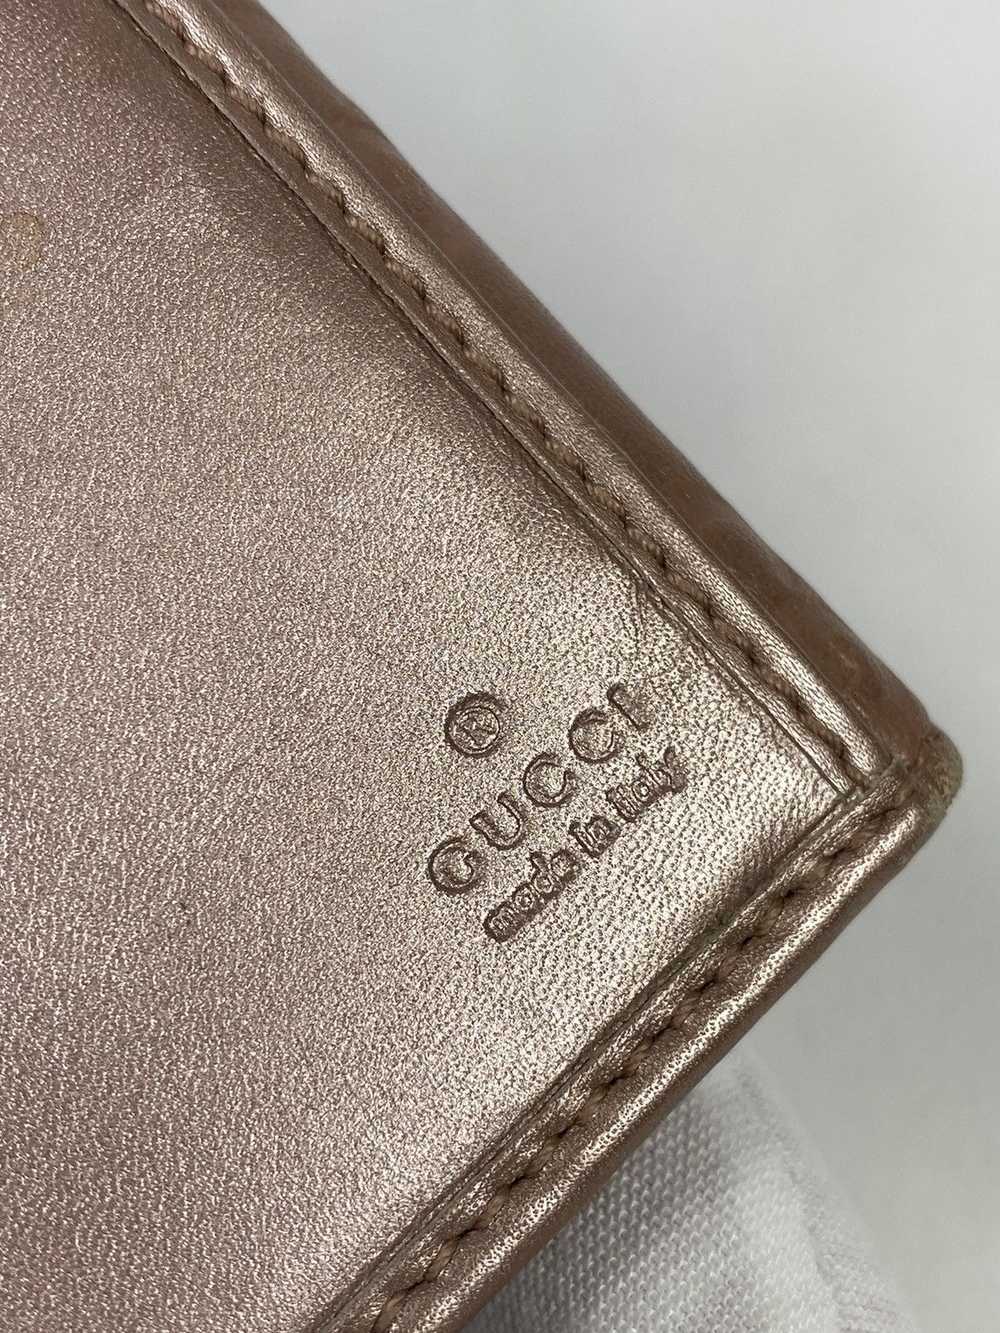 Gucci Gucci GG Guccissima leather long wallet - image 6